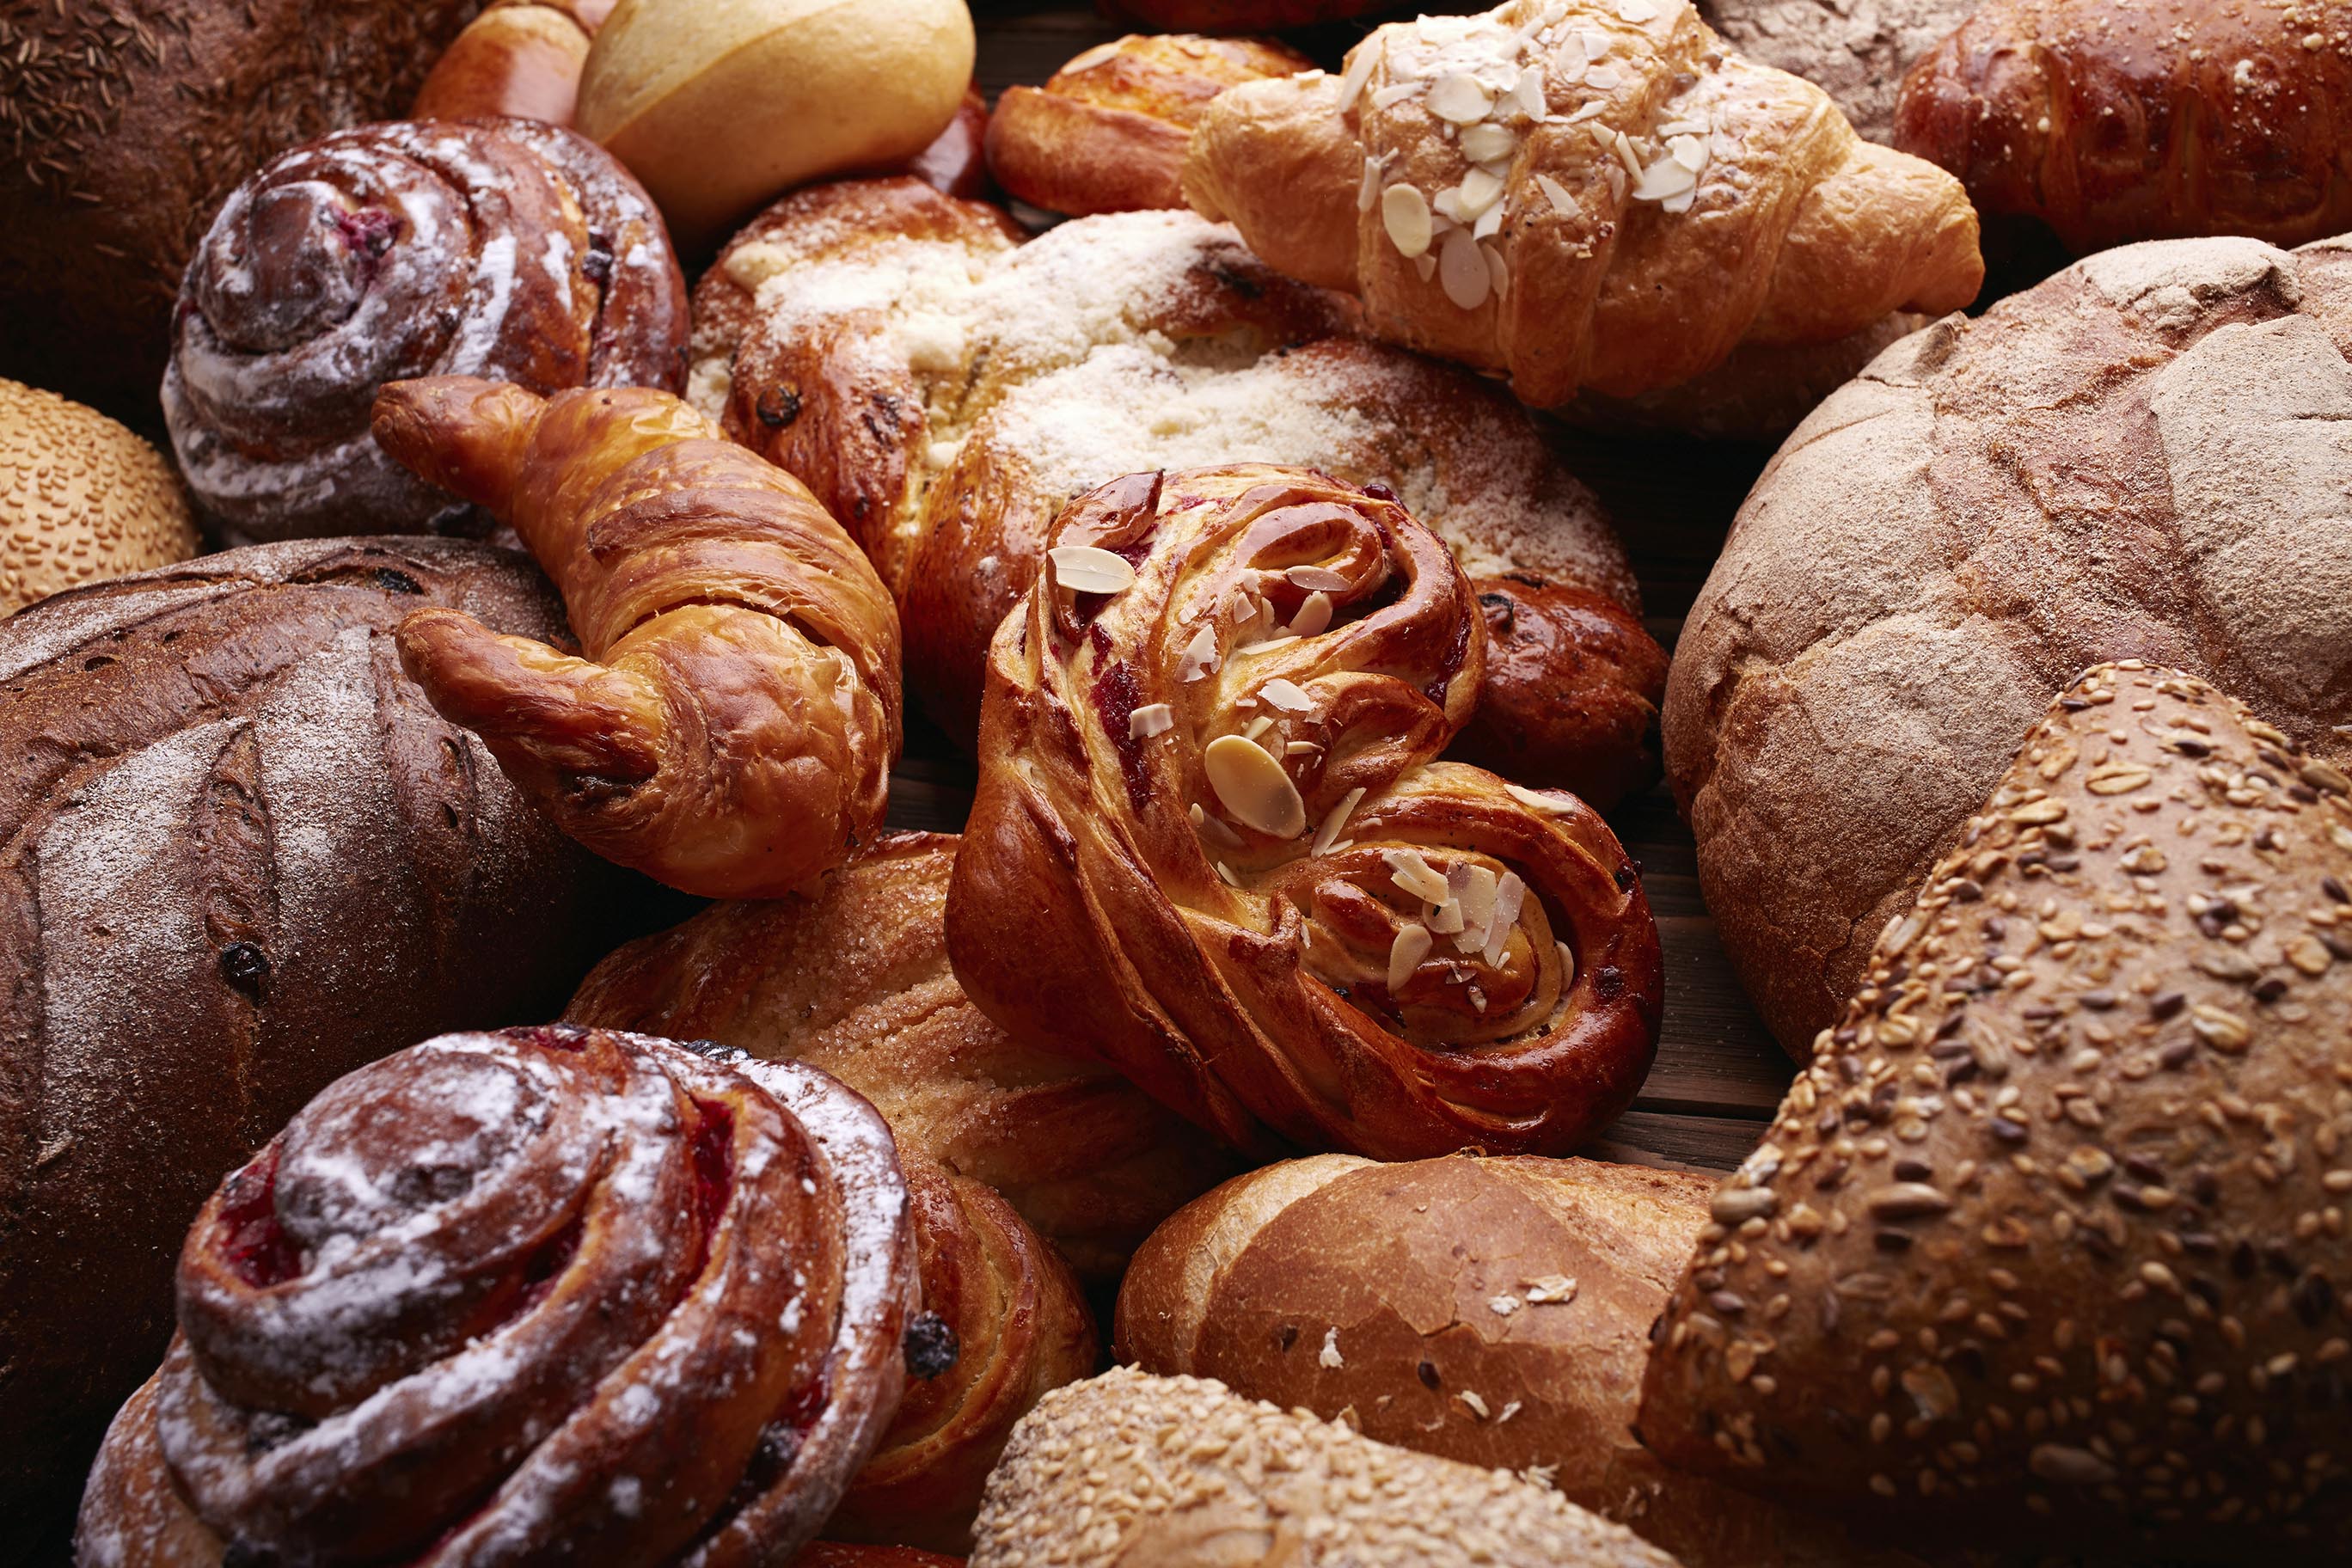 Bakery Products | Snack Food & Wholesale Bakery